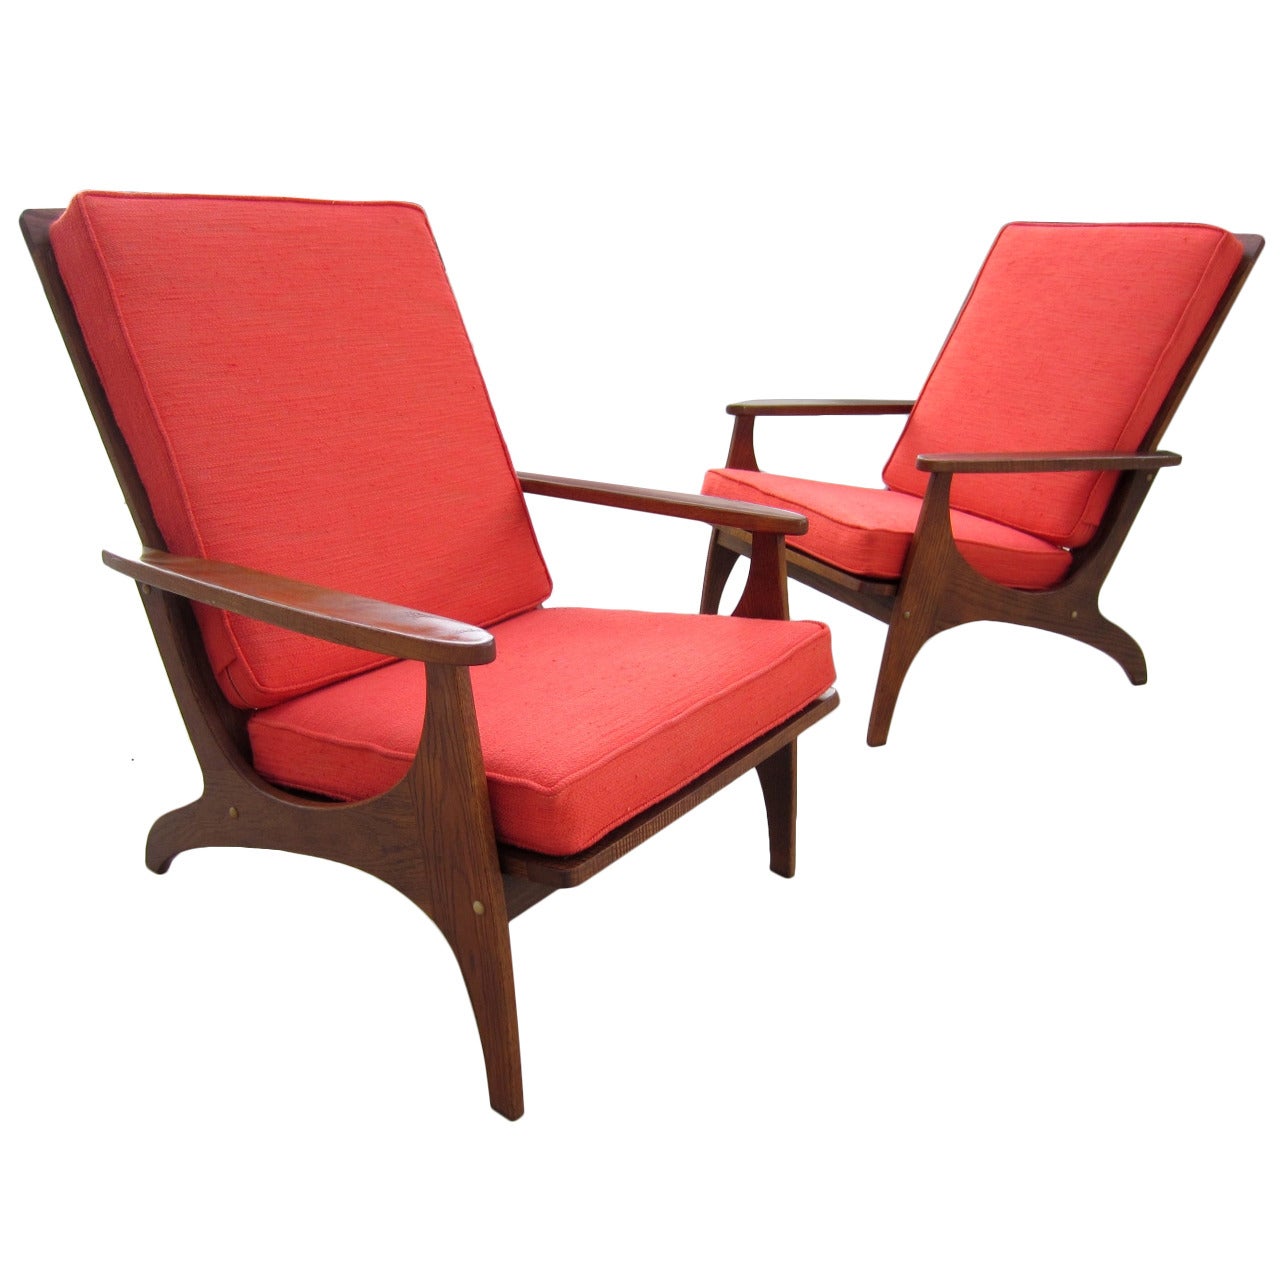 Pair of Mid-Century Modern Sculptural Lounge Chairs